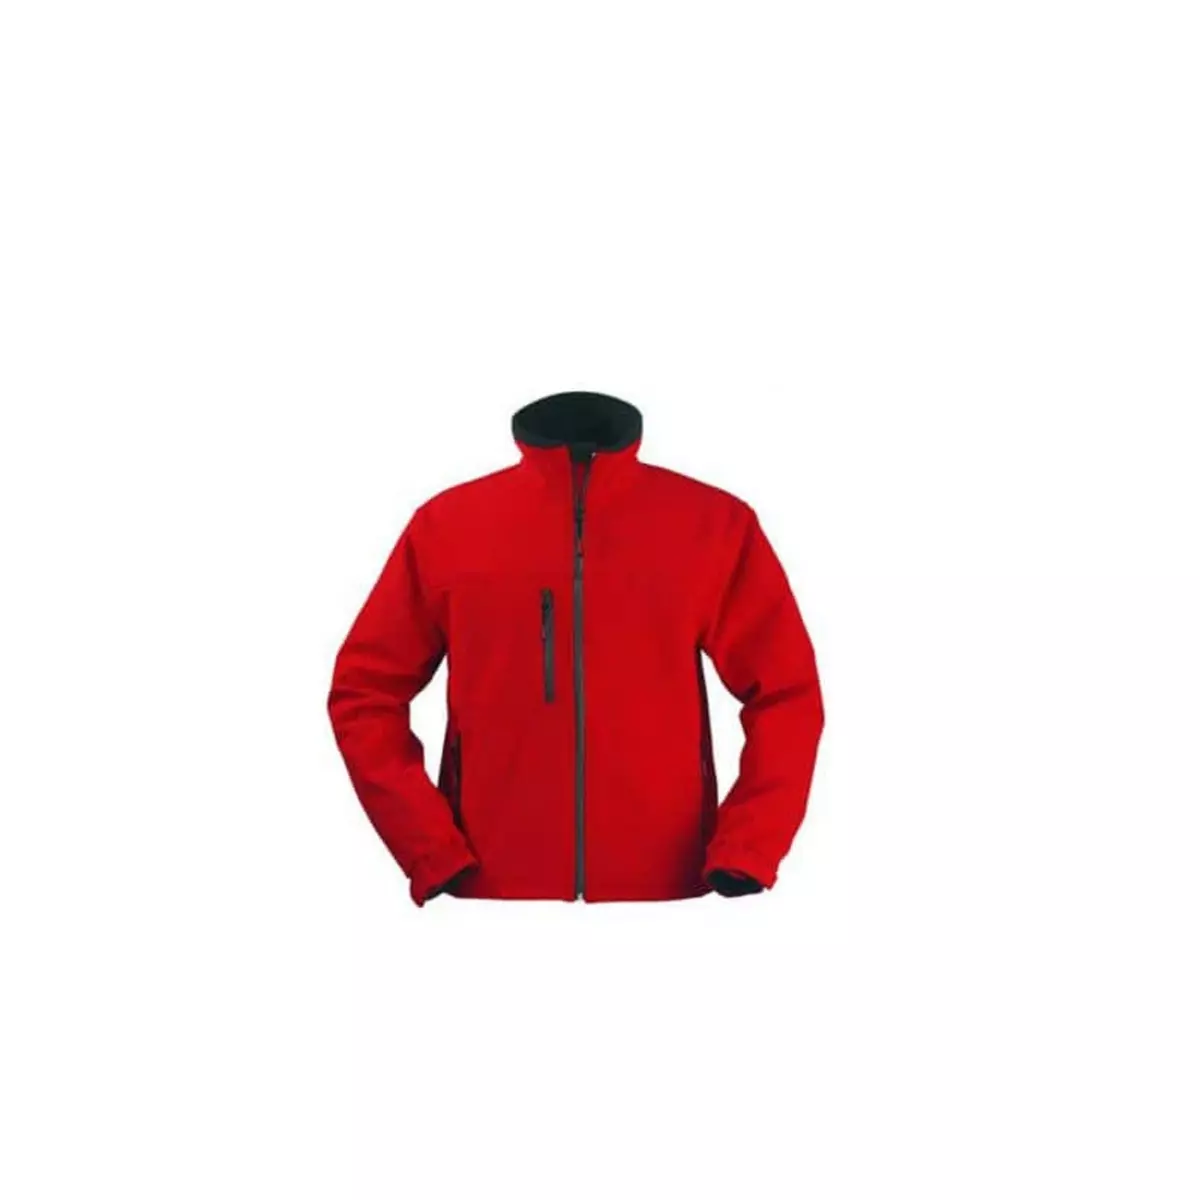 Coverguard Veste Softshell rouge Yang Coverguard taille XXL